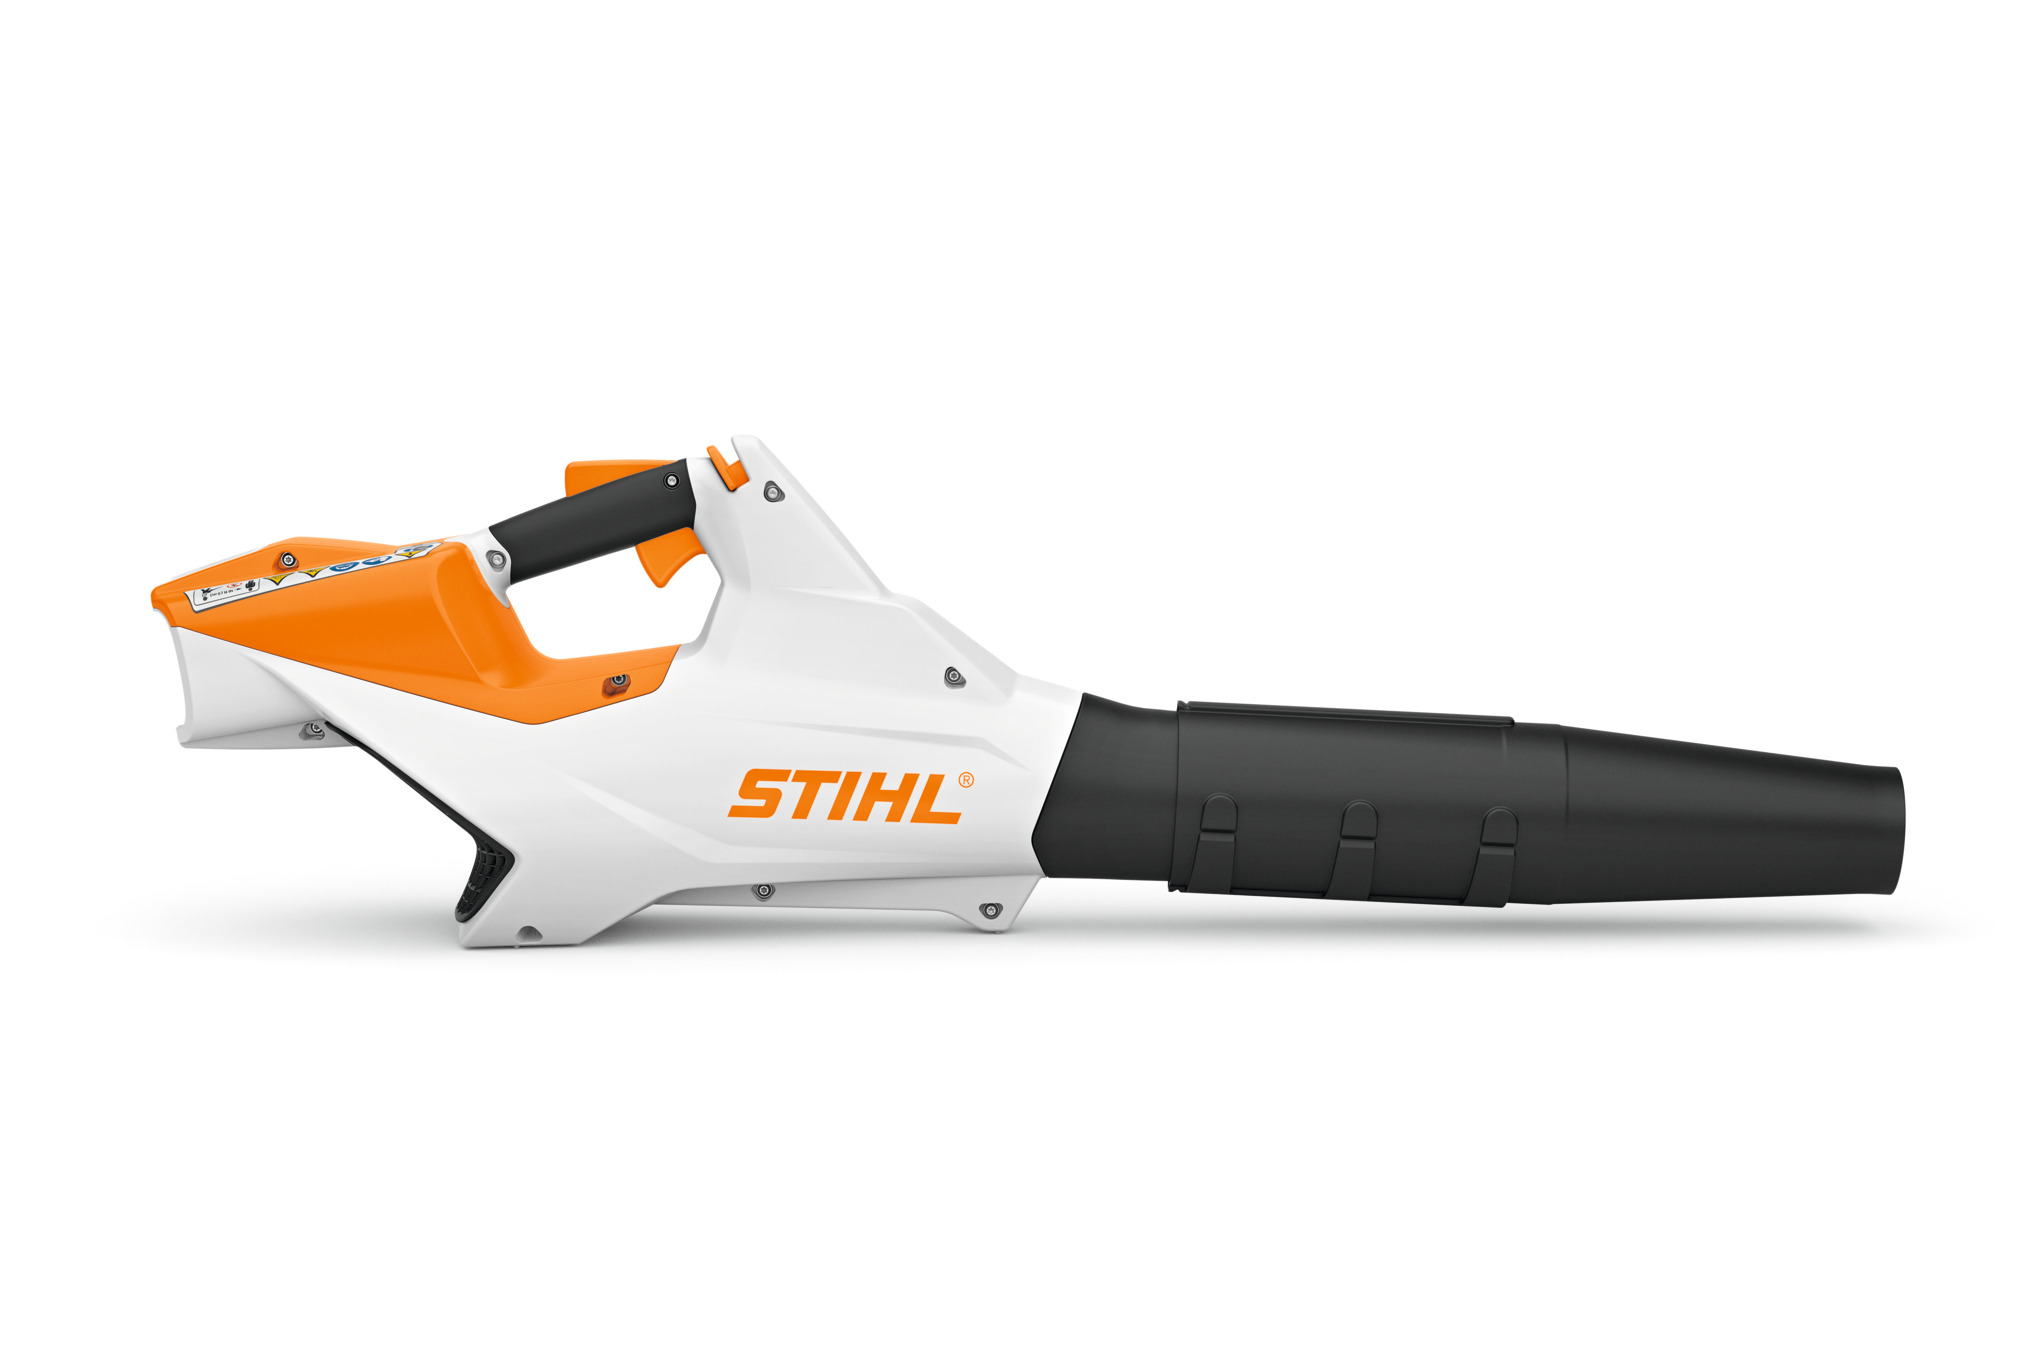 STIHL BGA 86 cordless blower from the AP-System